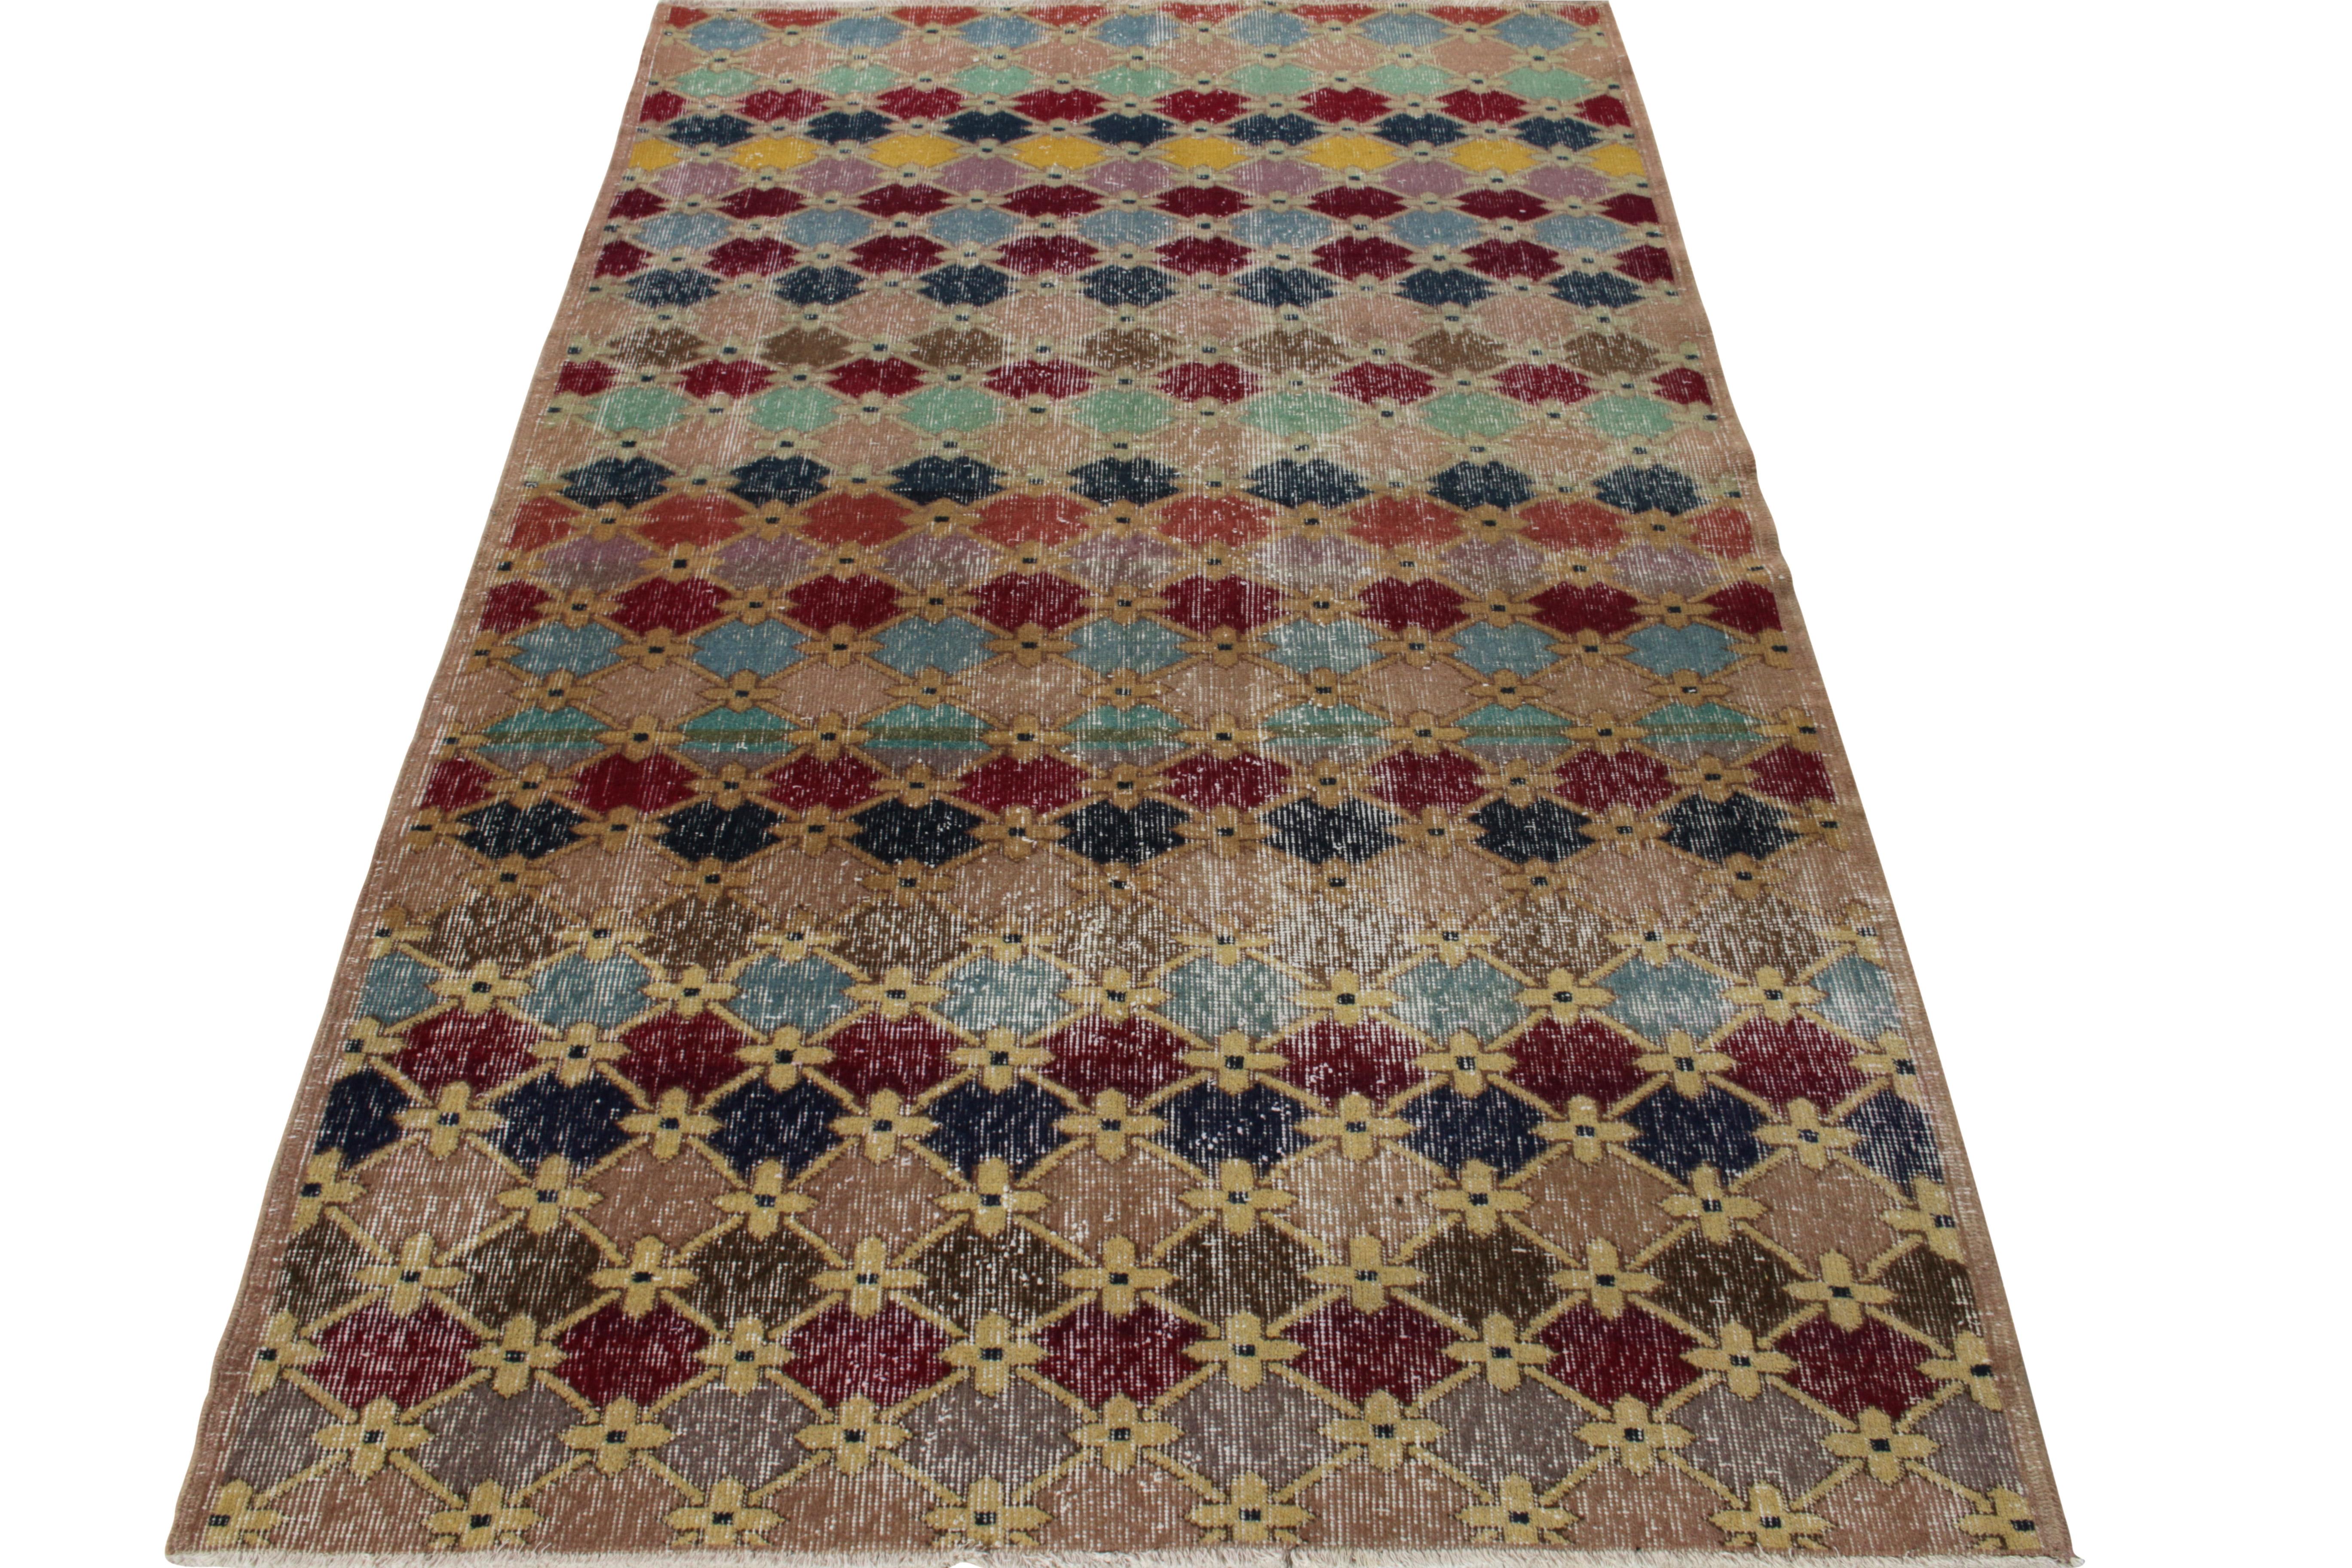 Originating from Turkey circa 1960-1970, a vintage Art Deco rug from a celebrated Turkish artist, entering Rug & Kilim’s coveted Mid-Century Pasha Collection. The rug beholds a mid-century modern vision wrapped in classic Art Deco aesthetics which